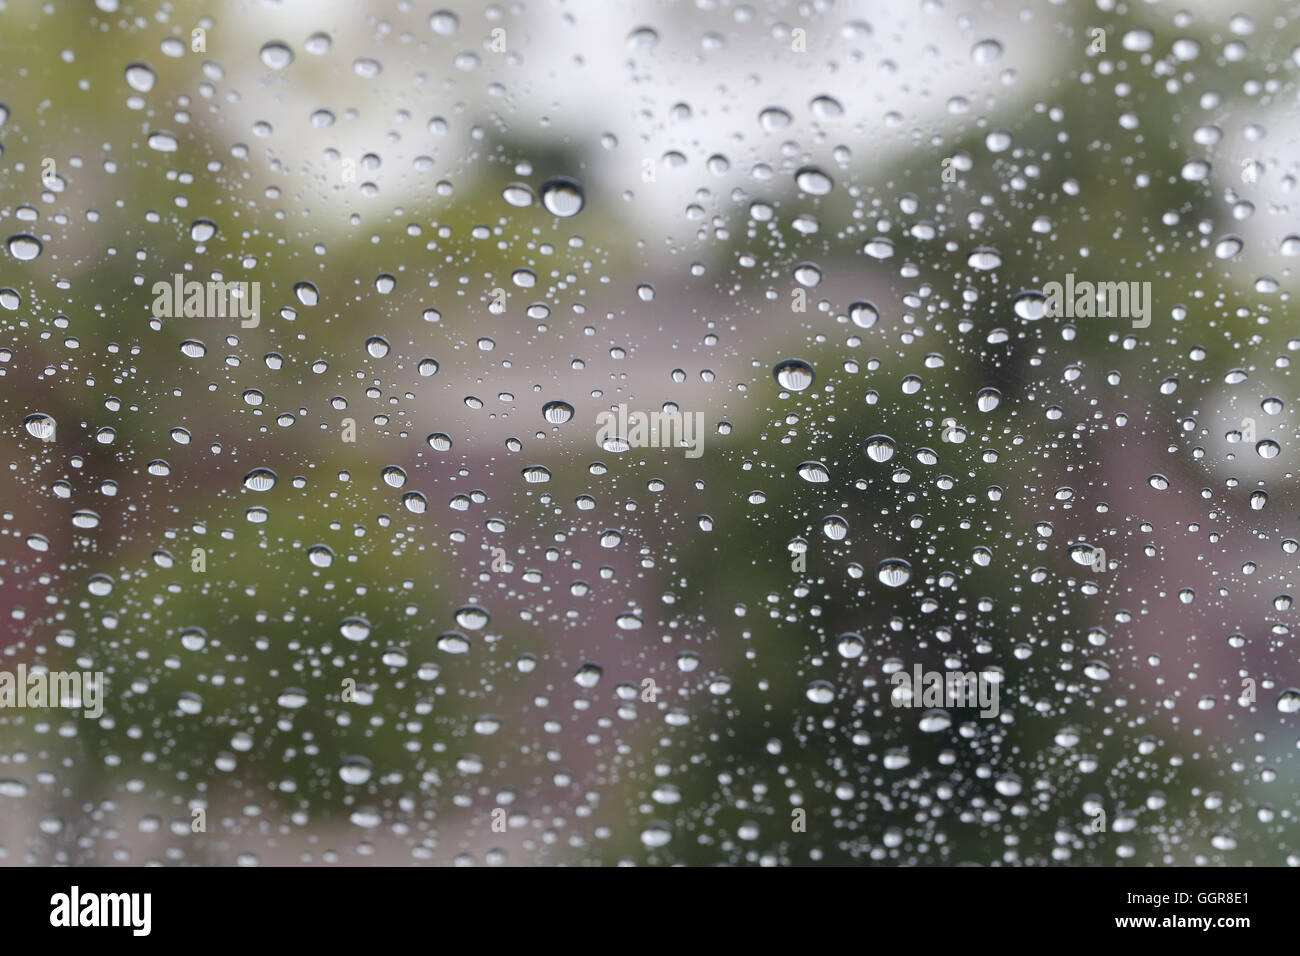 Drops of water perched on the glass for the design background. Stock Photo